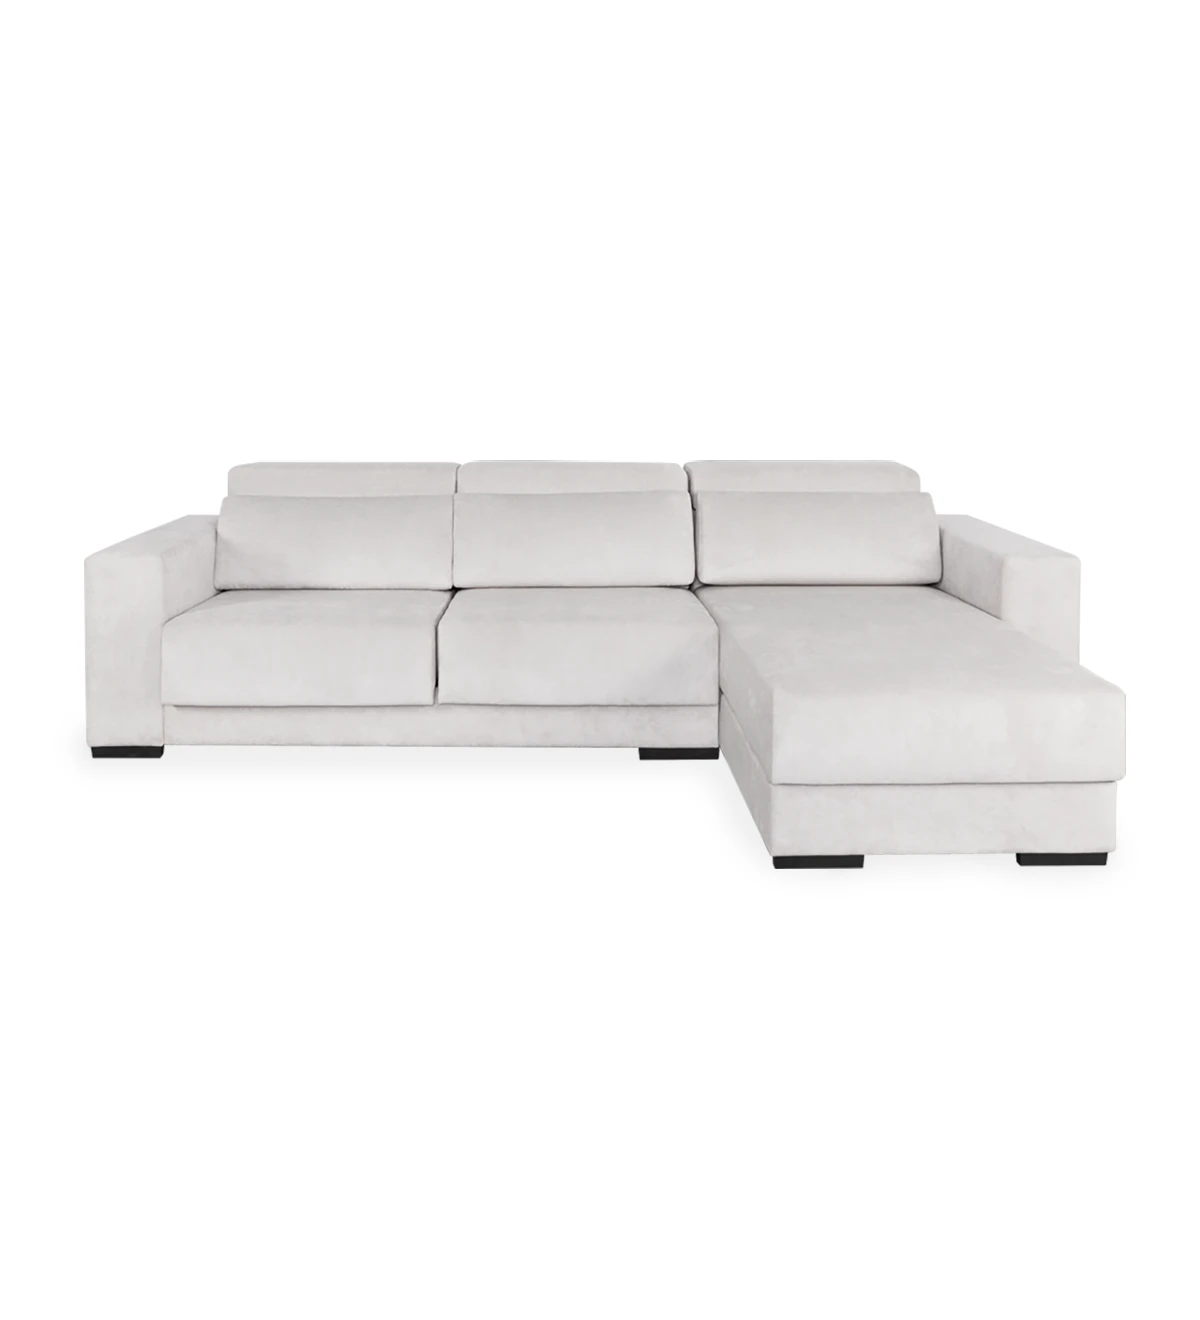 2 seater sofa with reversible chaise longue, upholstered in fabric, with reclining headrests, sliding seats, and storage on the chaise longue.